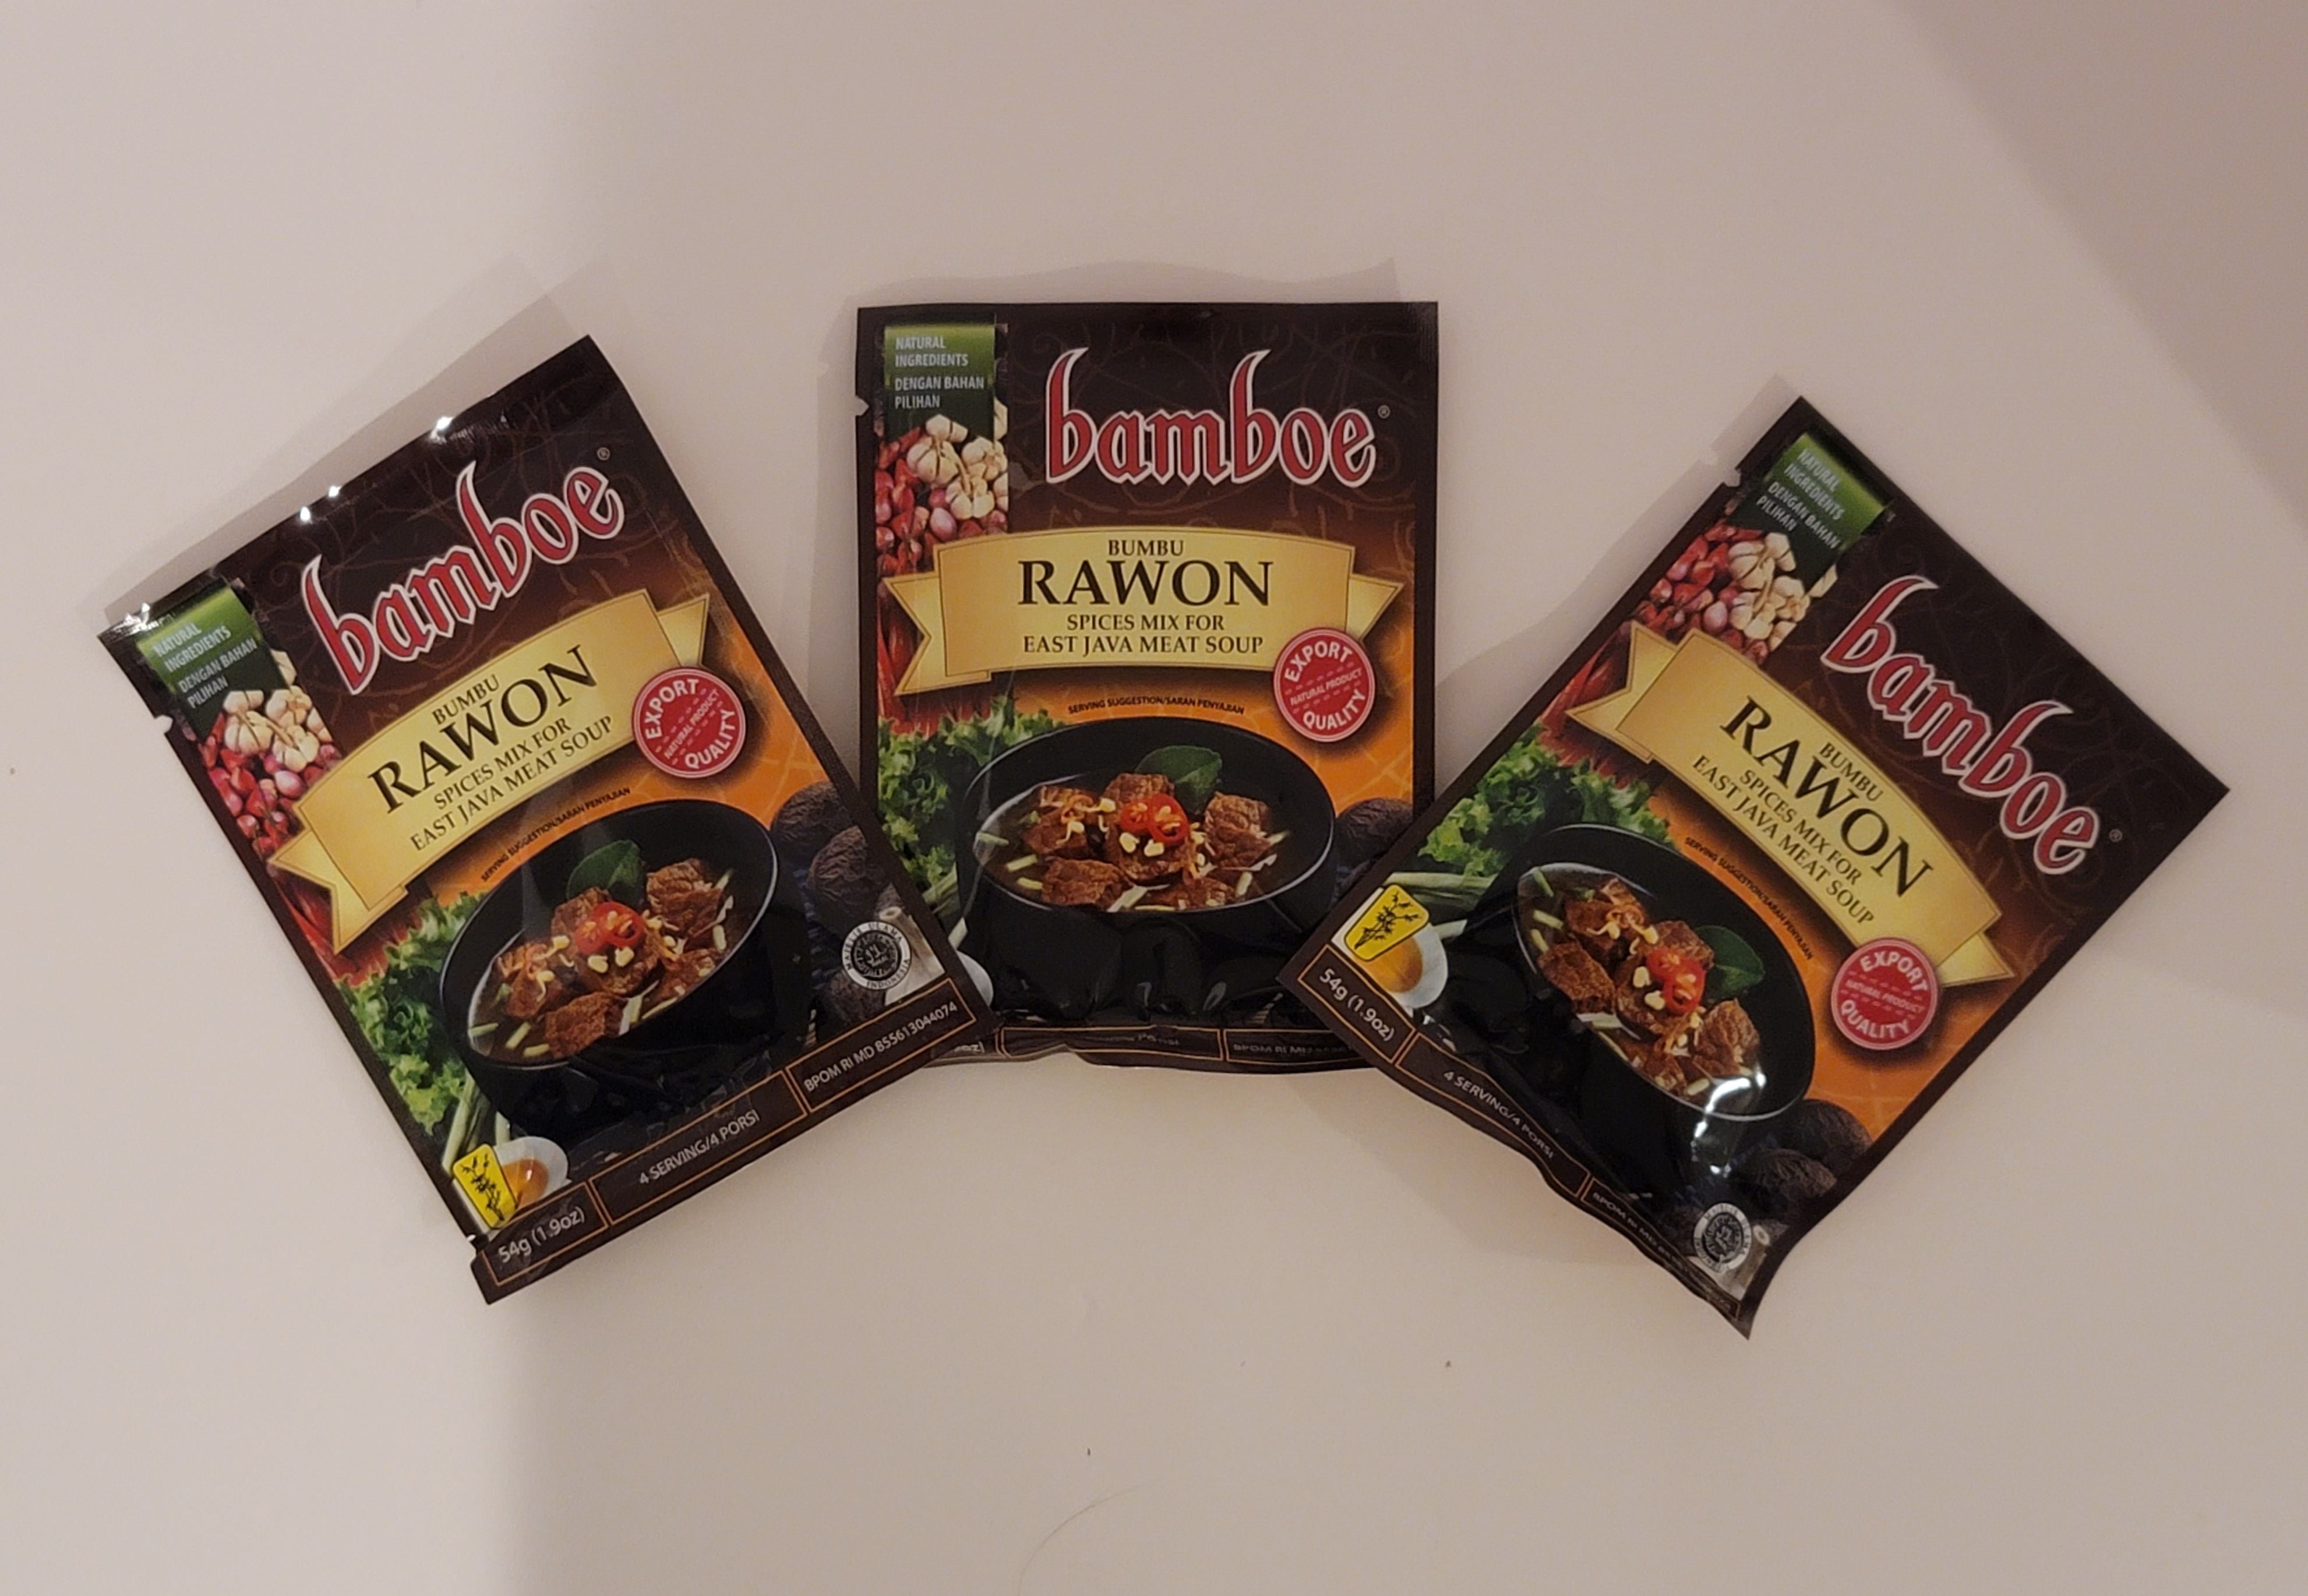 Bamboe Seasoning Rawon (Spices Mix for East Java Meat Soup)